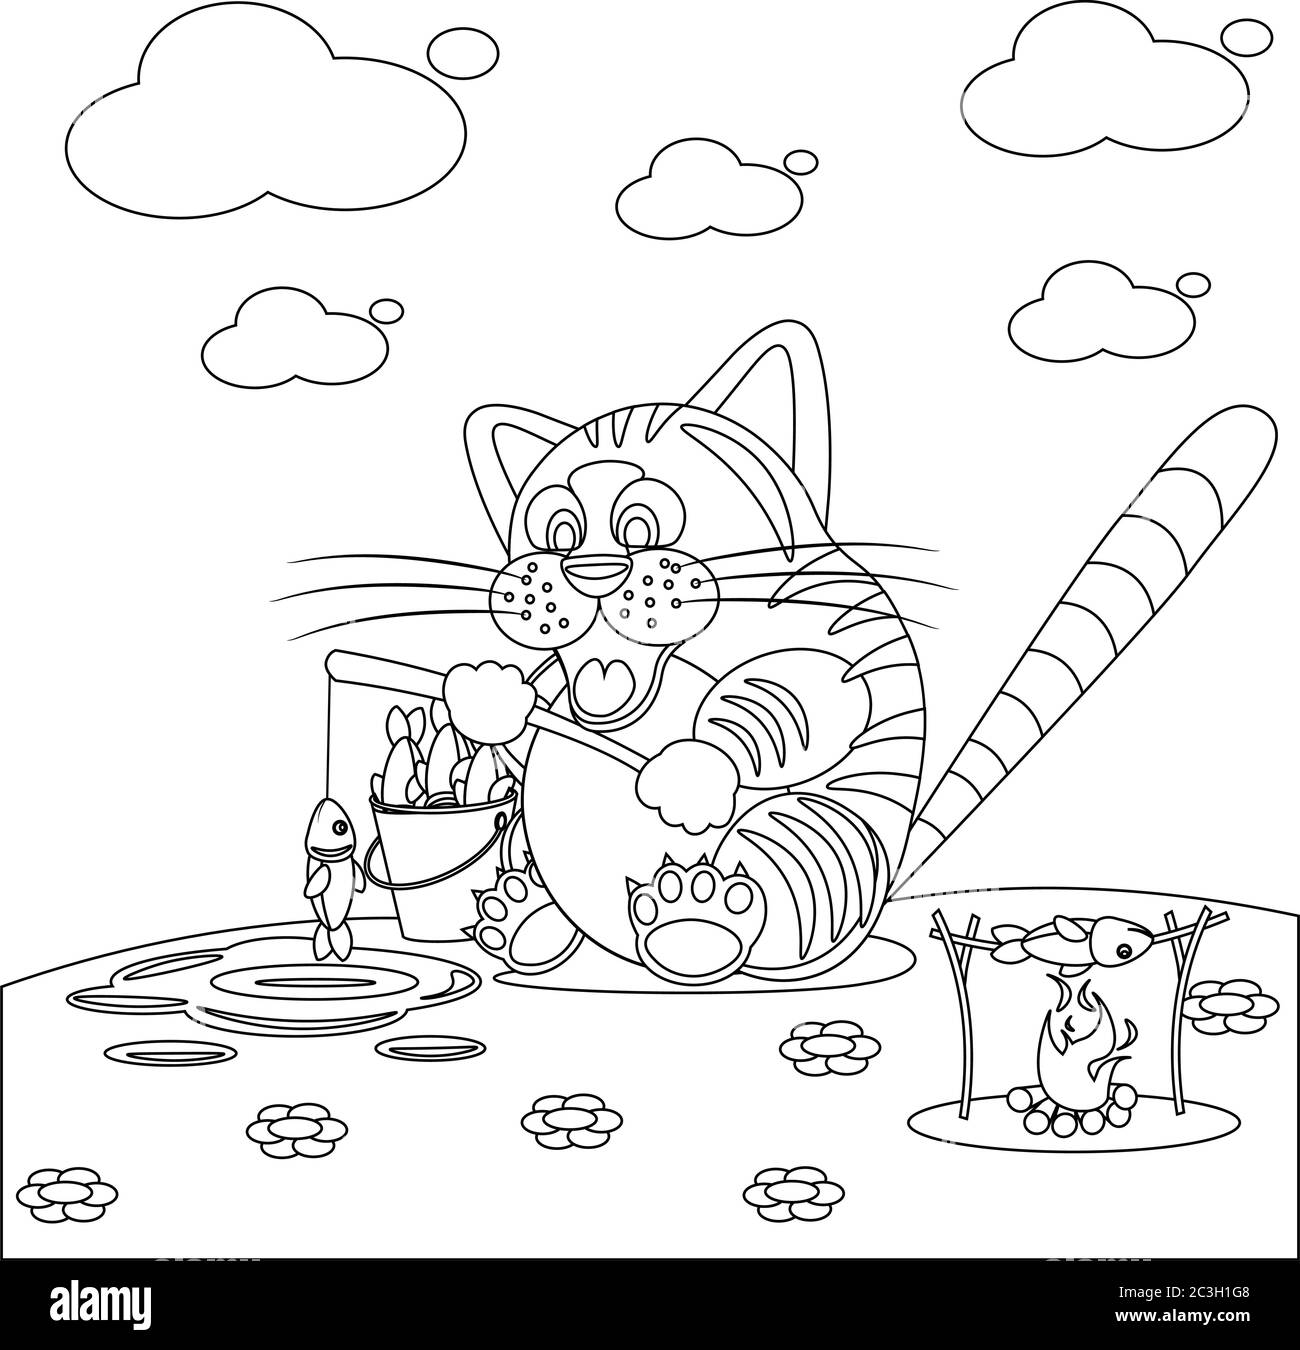 Coloring book cat catches fish for adults and children. Vector black and white illustration. Stock Vector